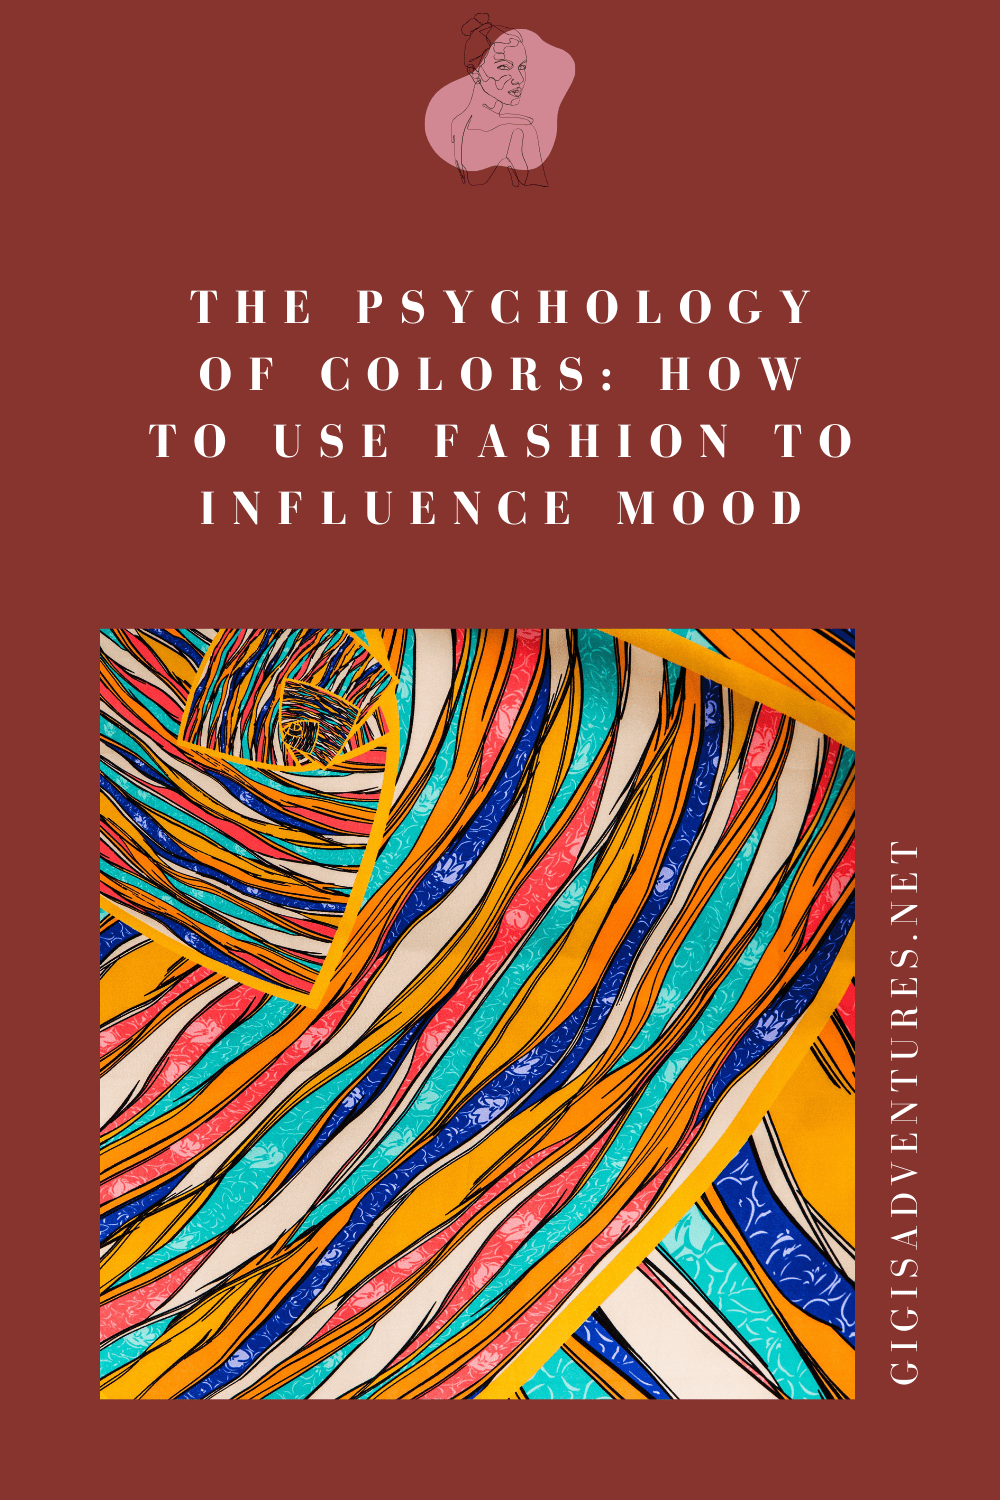 The Psychology of Colors How to Use Fashion to Influence Mood